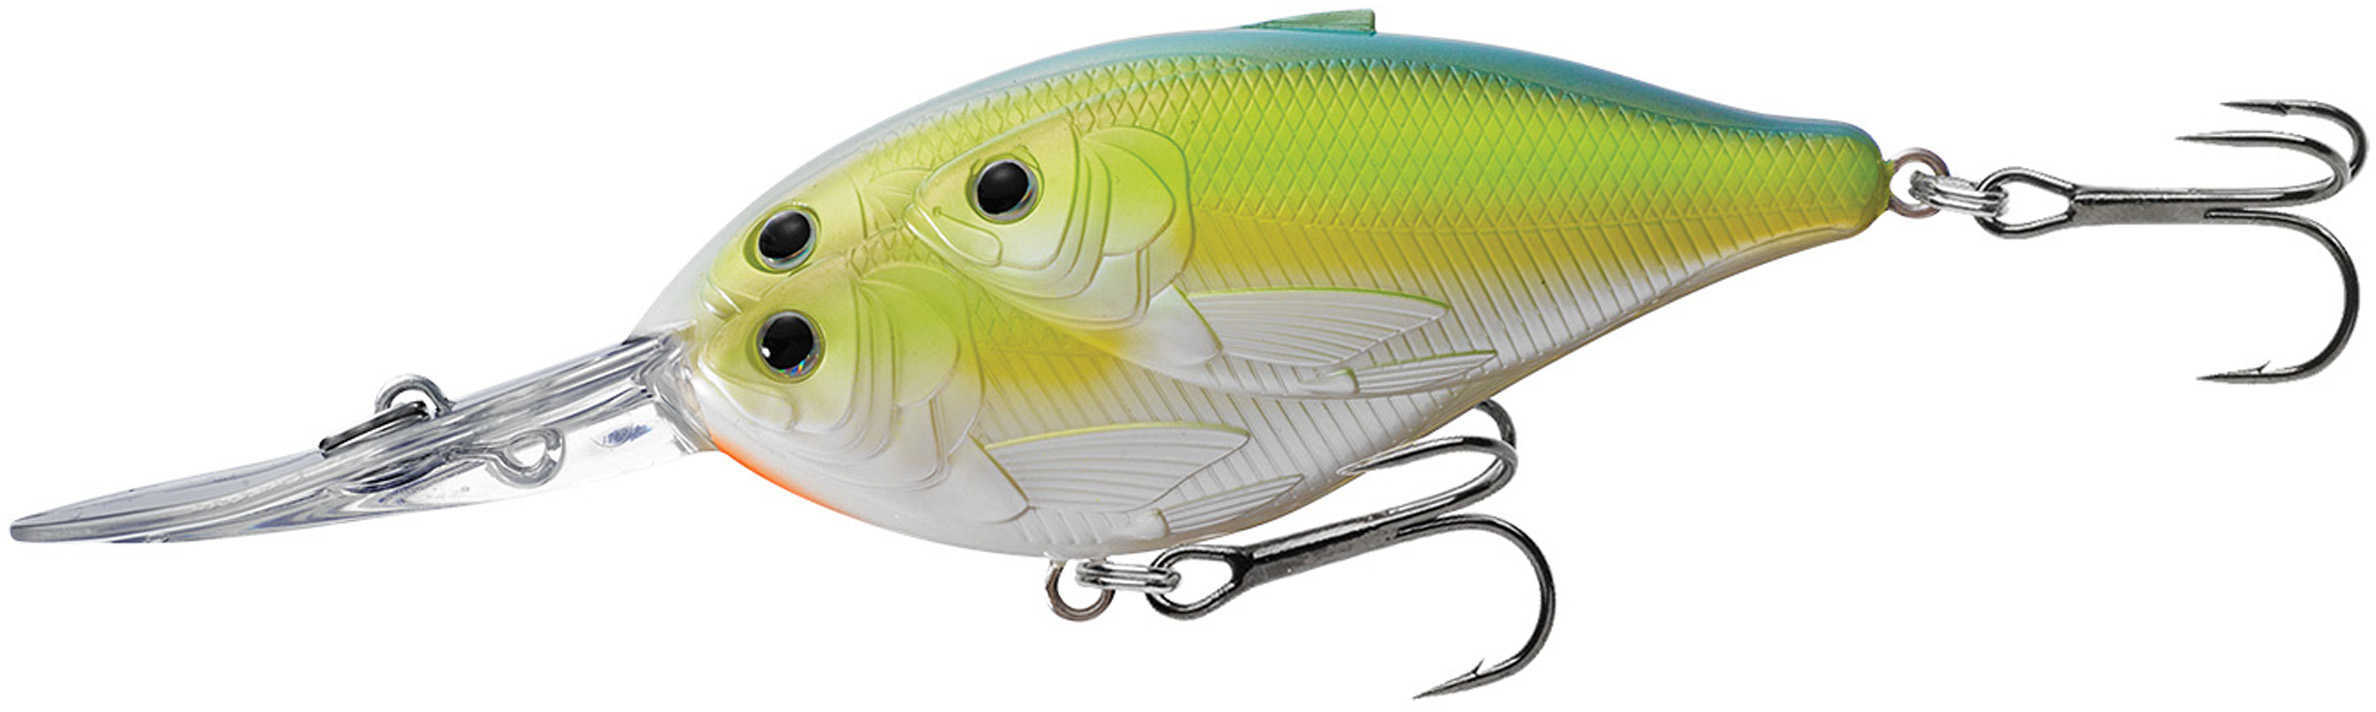 LIVETARGET Lures / Koppers Fishing and Tackle Corp Threadfin Shad Crankbait 3" Number 2 Hook Size 16 Depth Chartreuse/Pearl/Blue